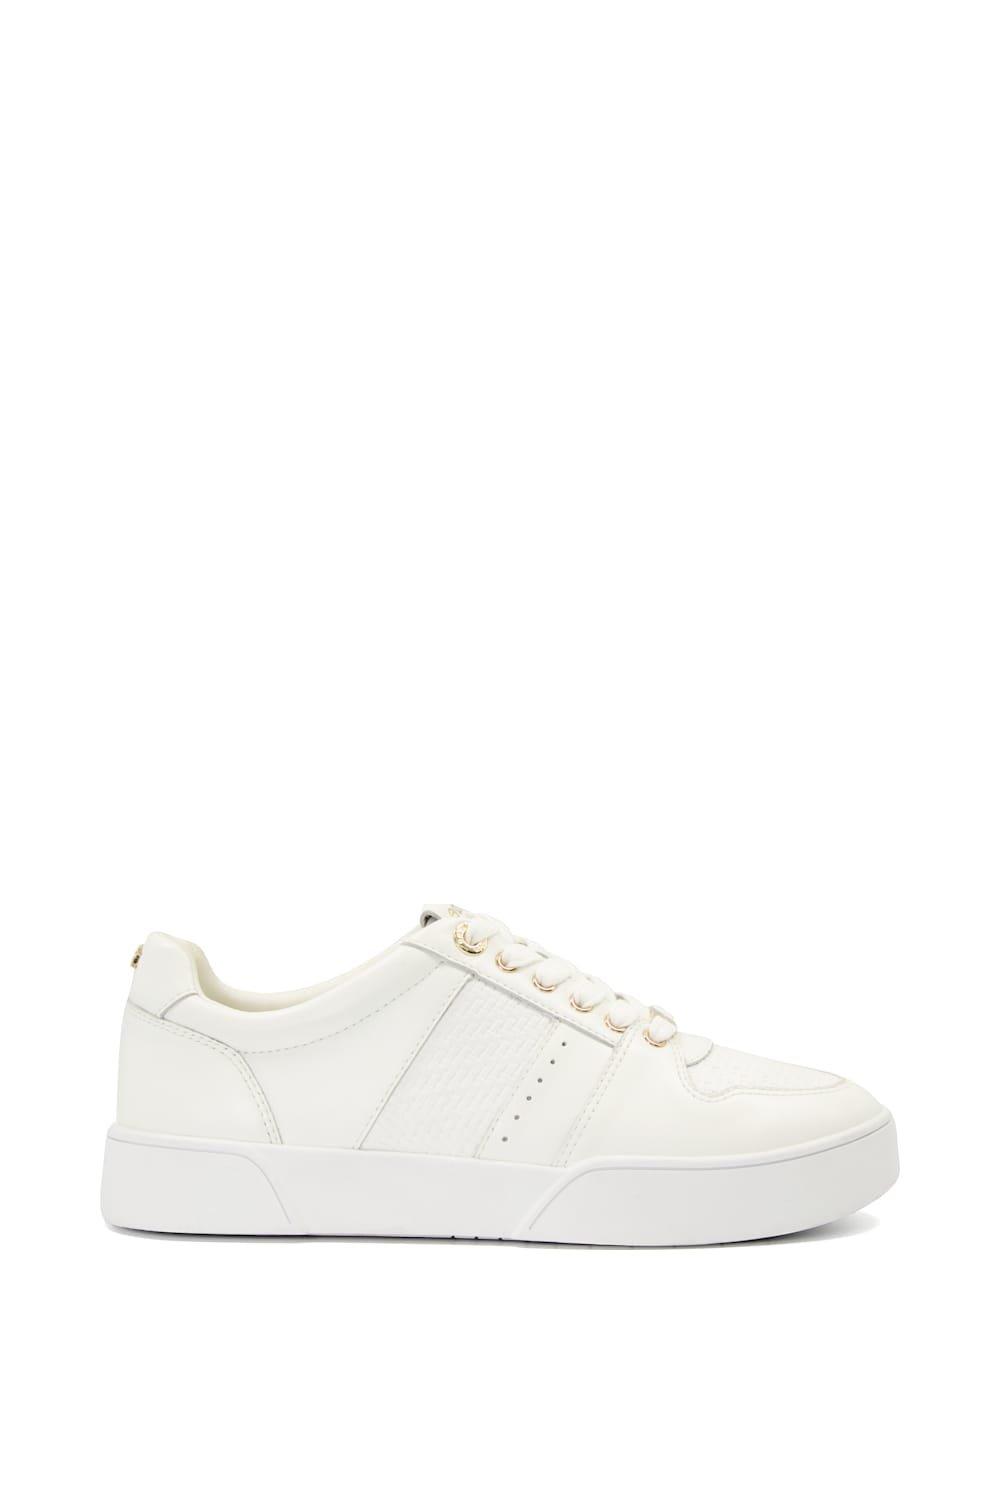 Trainers | 'Elysium' Leather Trainers | Dune London